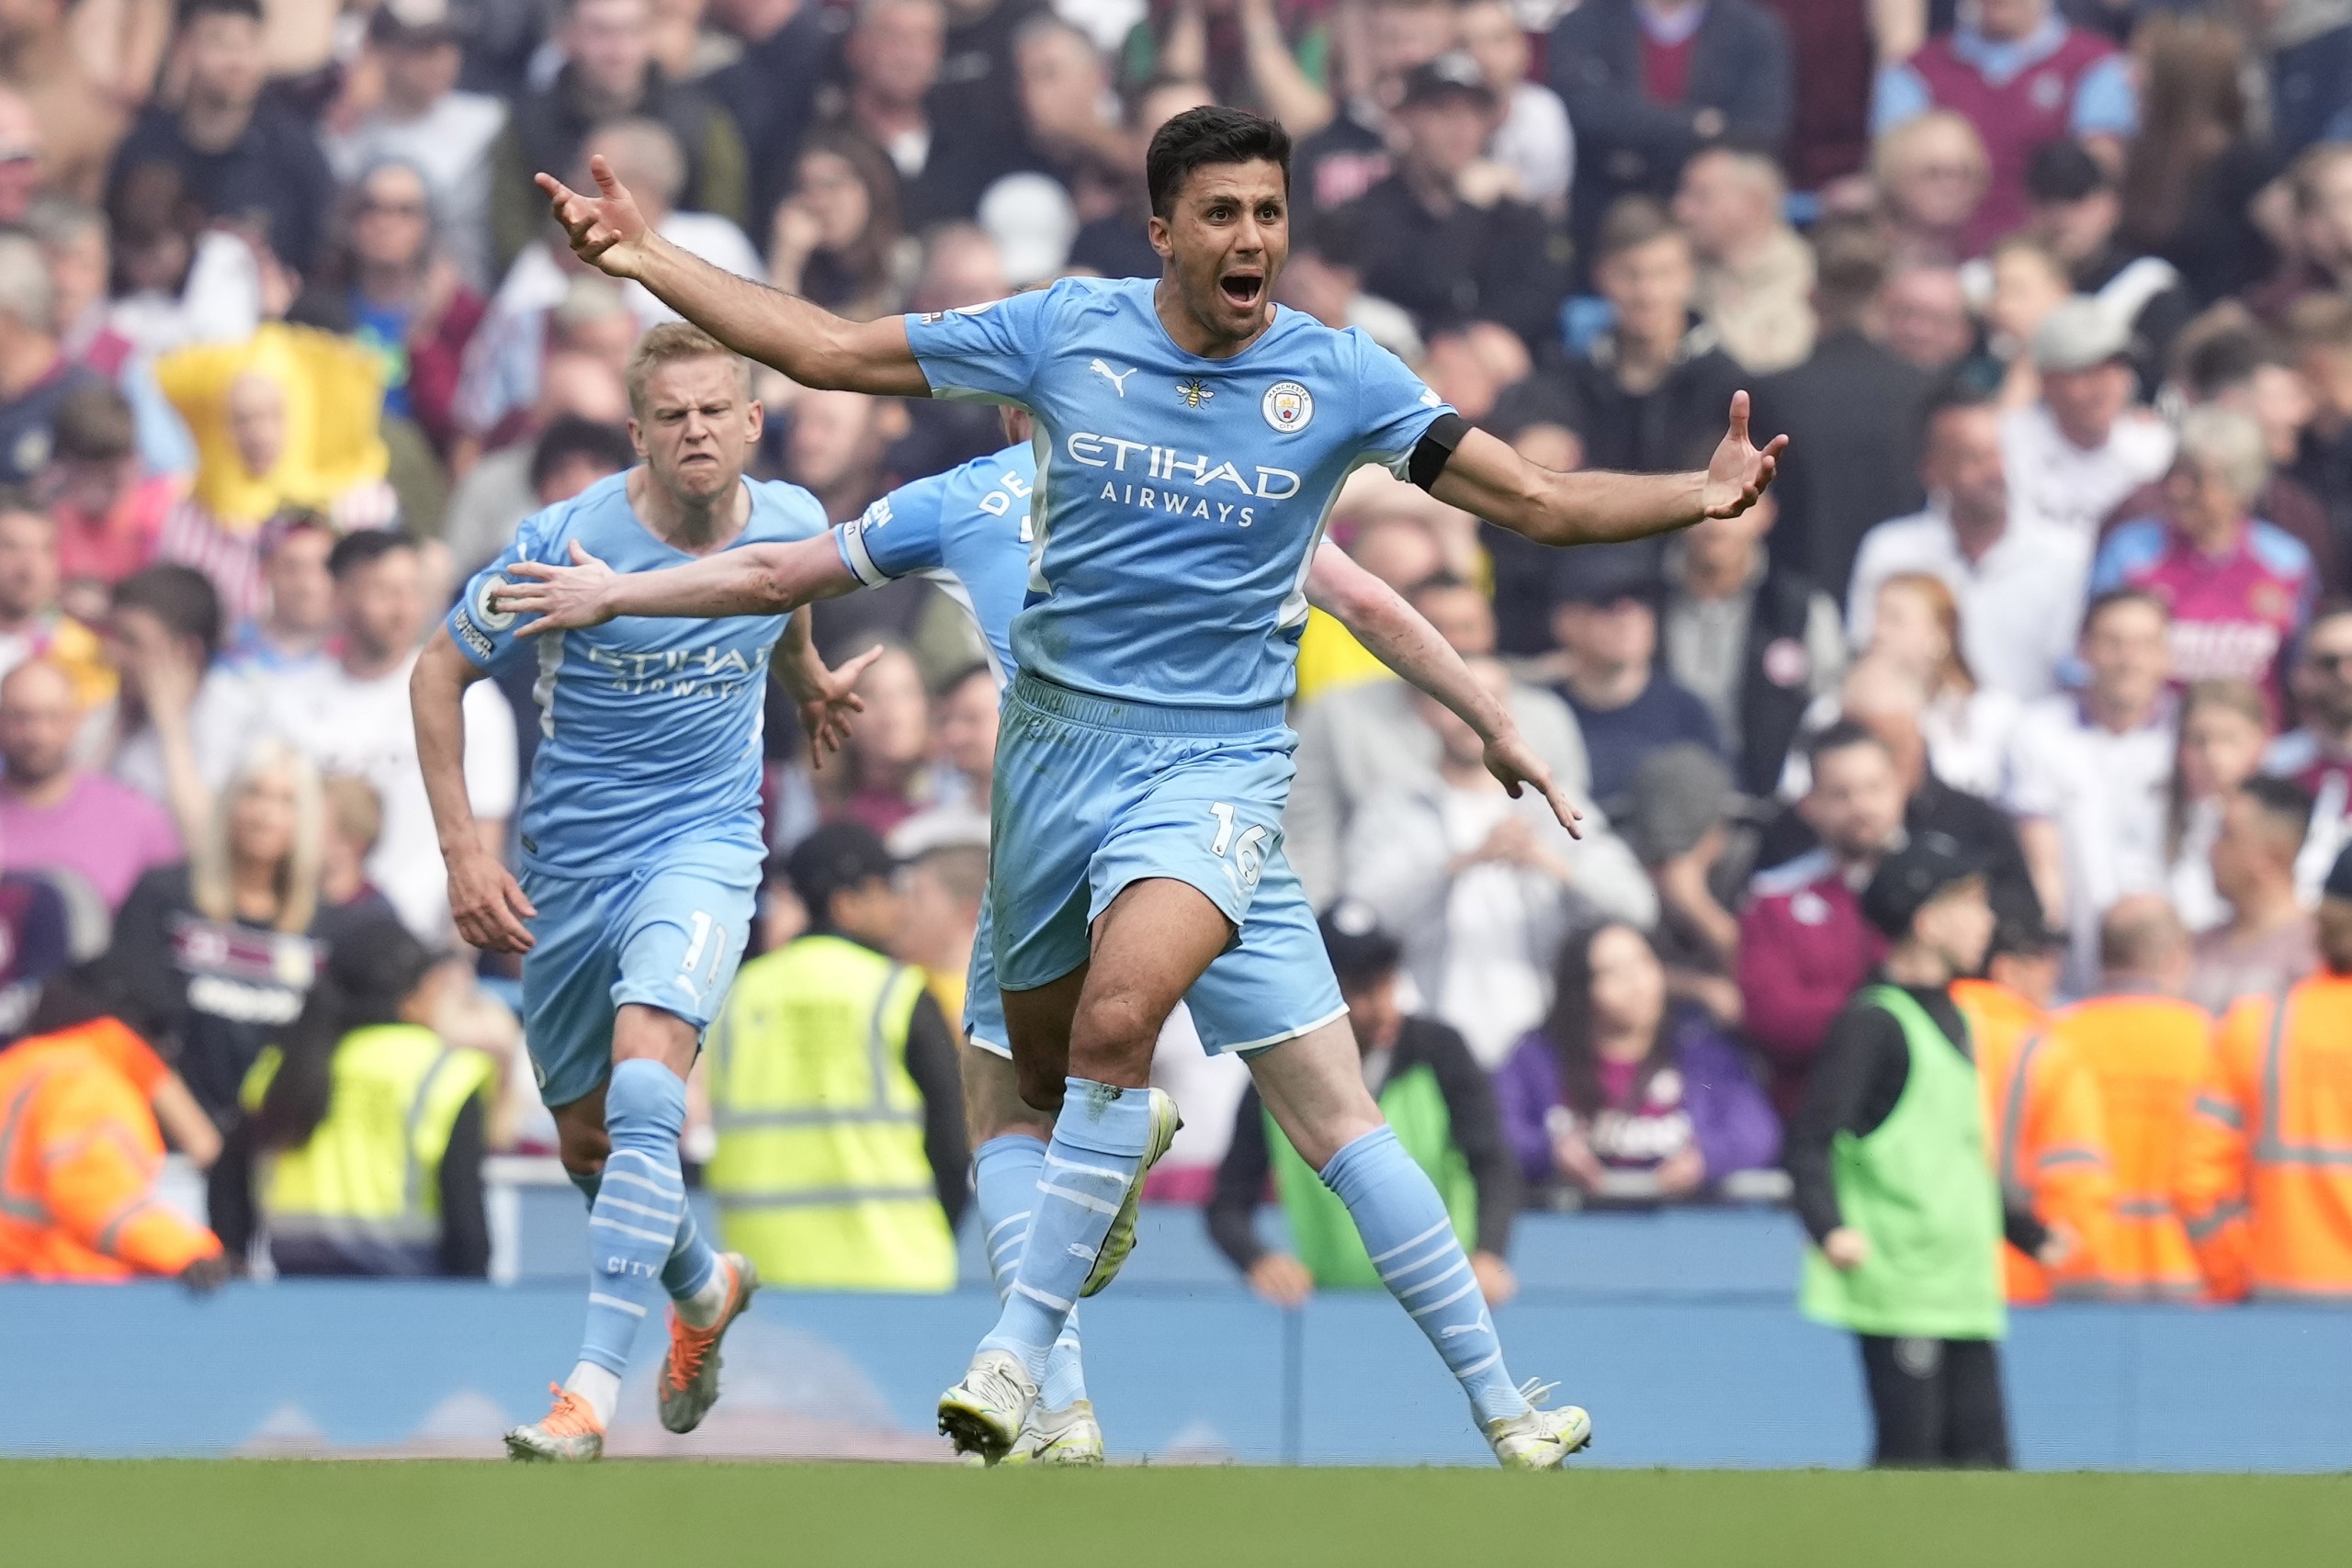 epa09966642 Rodri of Manchester City celebrates after scoring the 2-2 equalizer during the English Premier League soccer match between Manchester City and Aston Villa in Manchester, Britain, 22 May 2022.  EPA/ANDREW YATES EDITORIAL USE ONLY. No use with unauthorized audio, video, data, fixture lists, club/league logos or 'live' services. Online in-match use limited to 120 images, no video emulation. No use in betting, games or single club/league/player publications